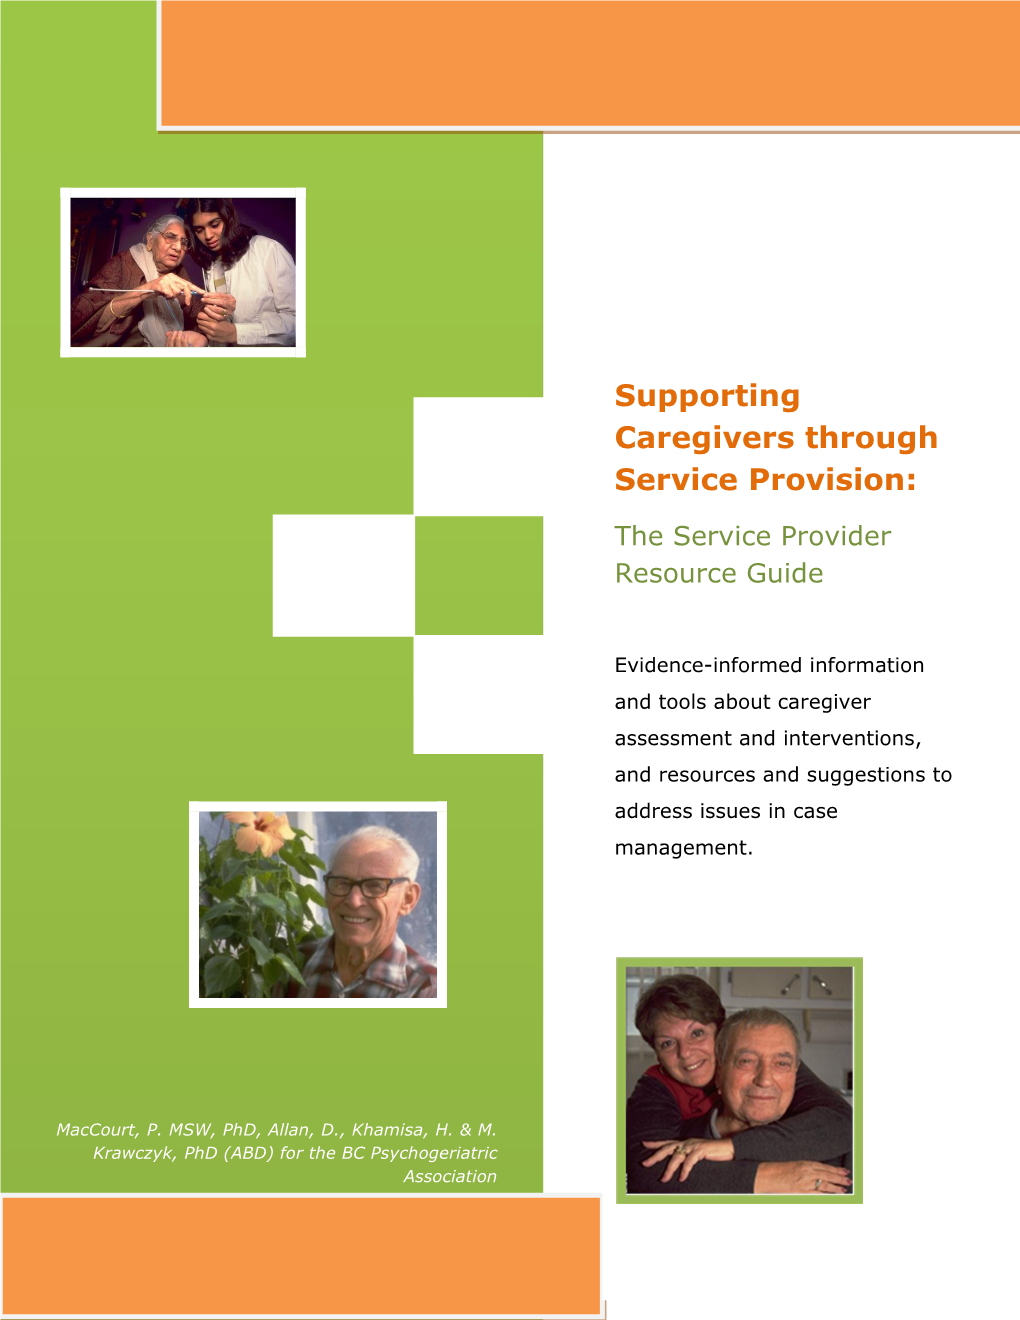 Supporting Caregivers Through Service Provision